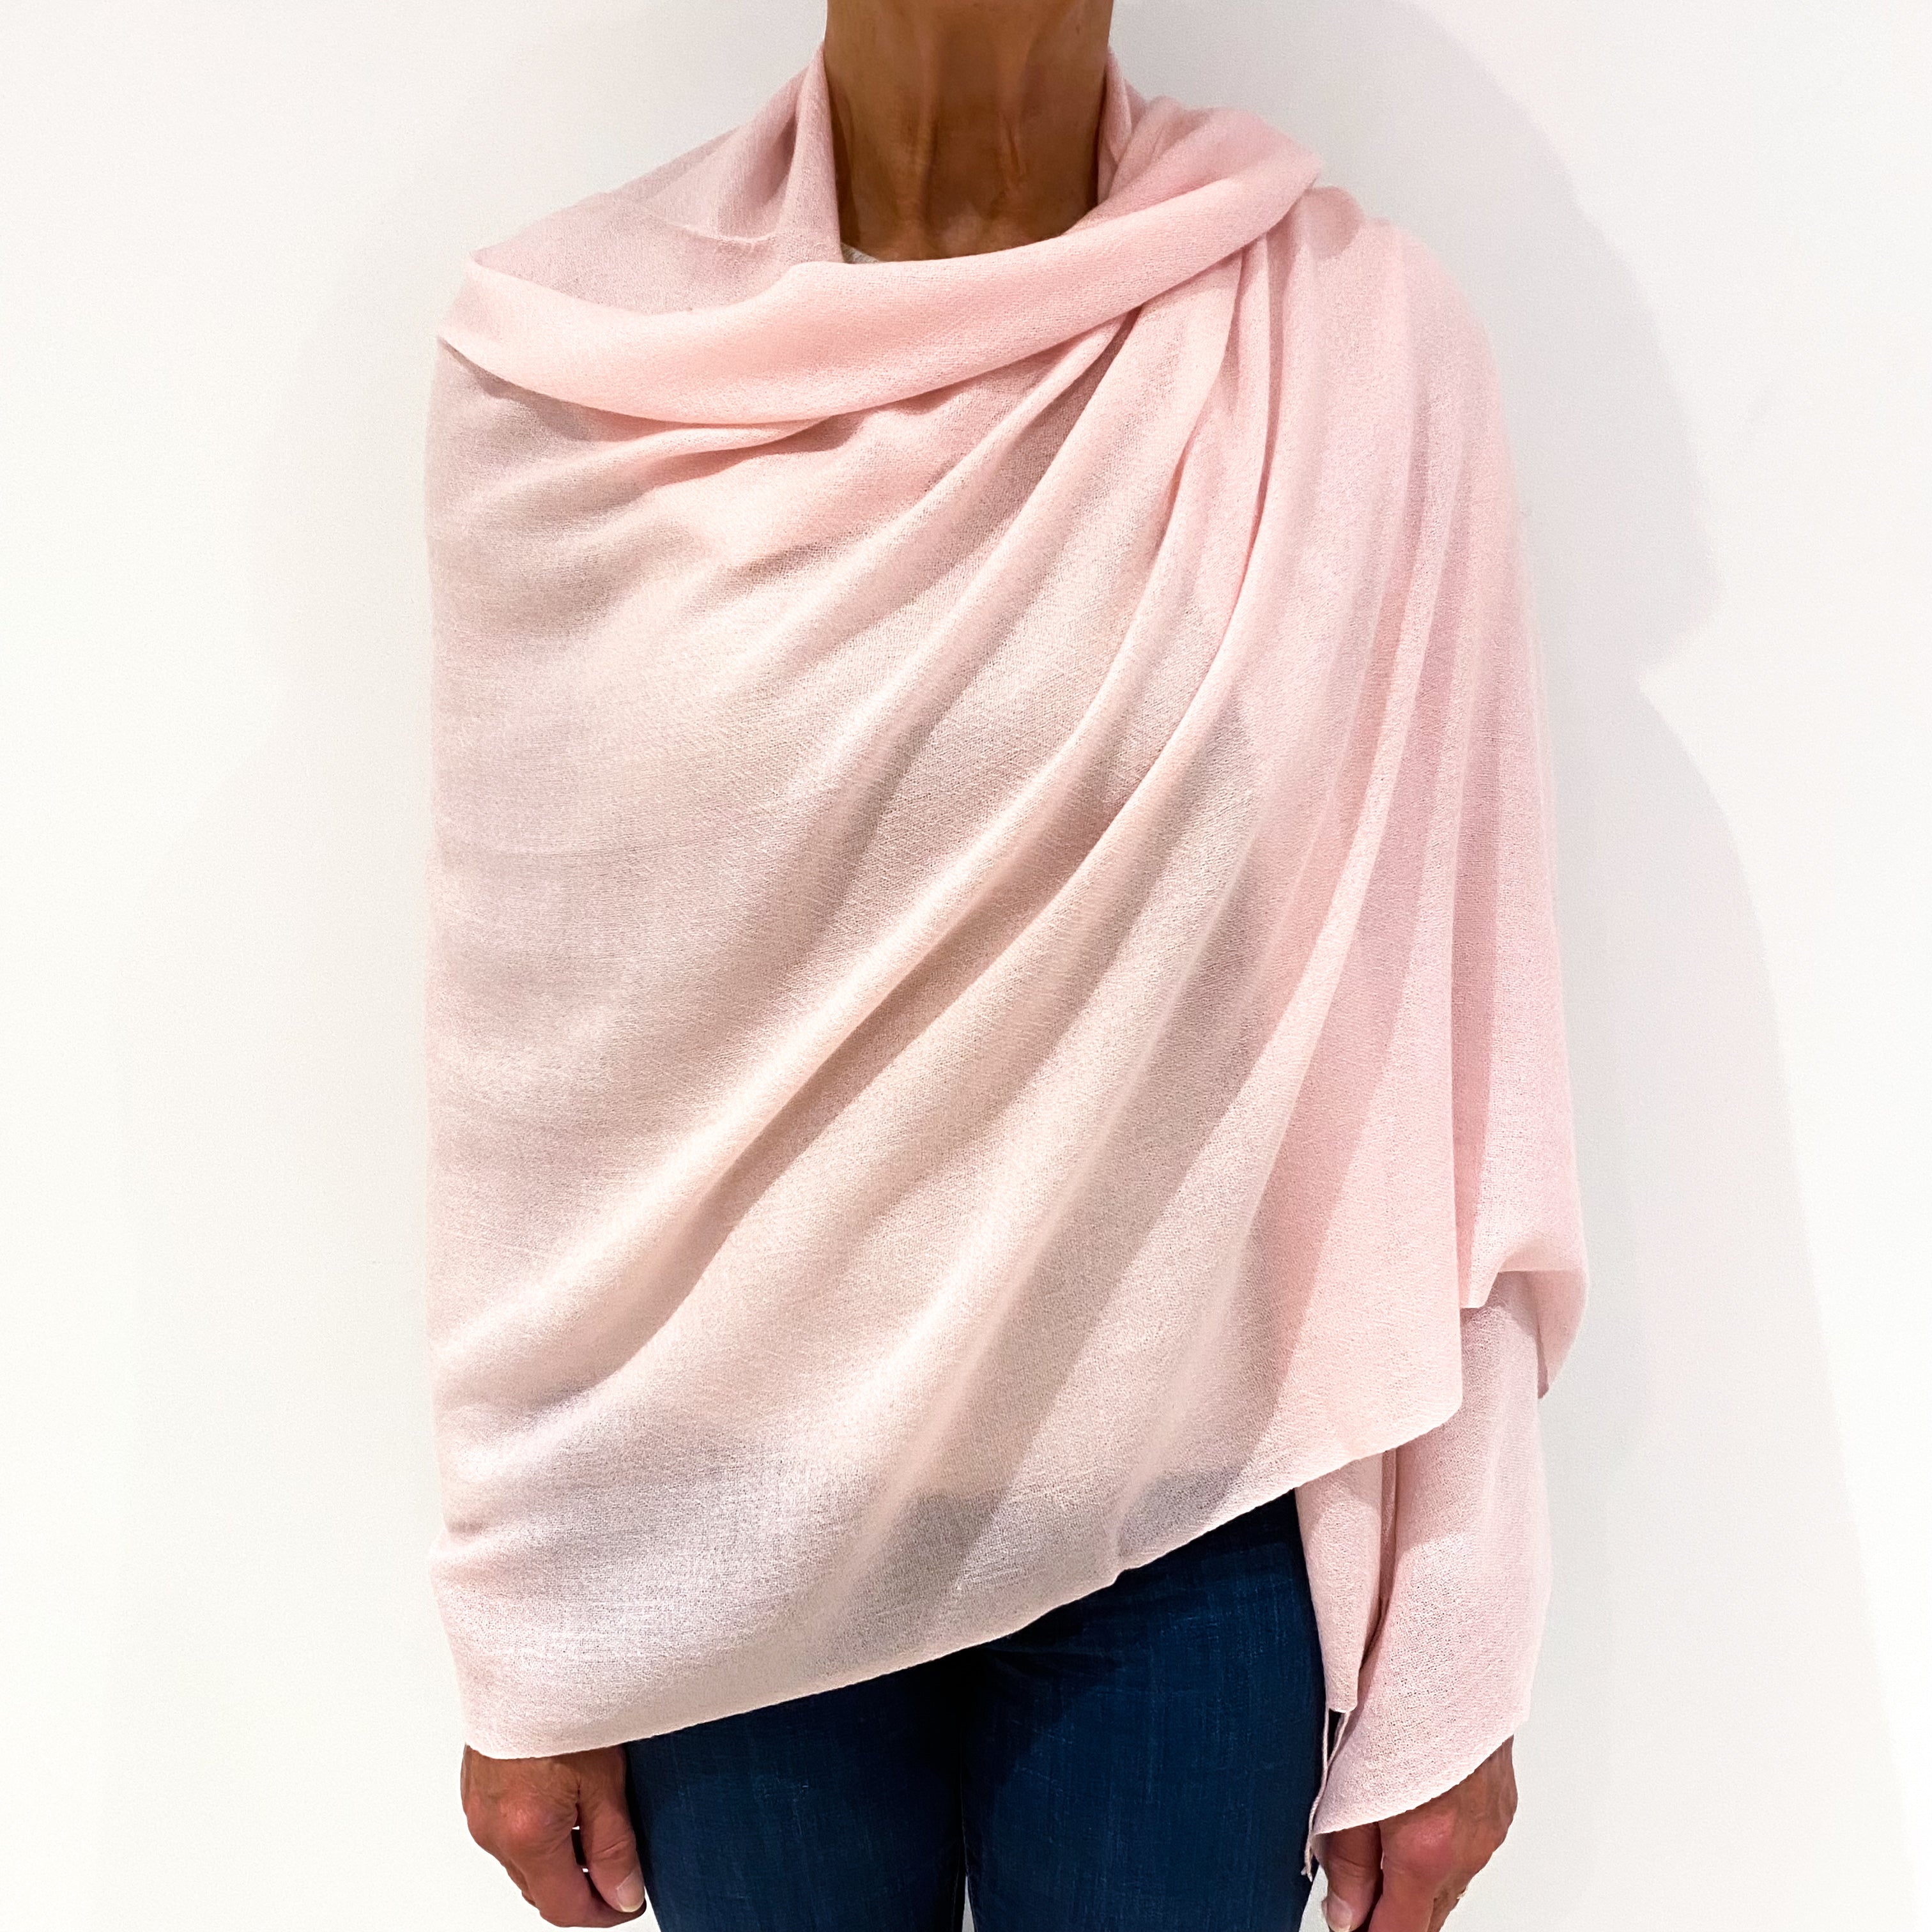 Oyster Pink Brand New Cashmere Pashmina Scarf